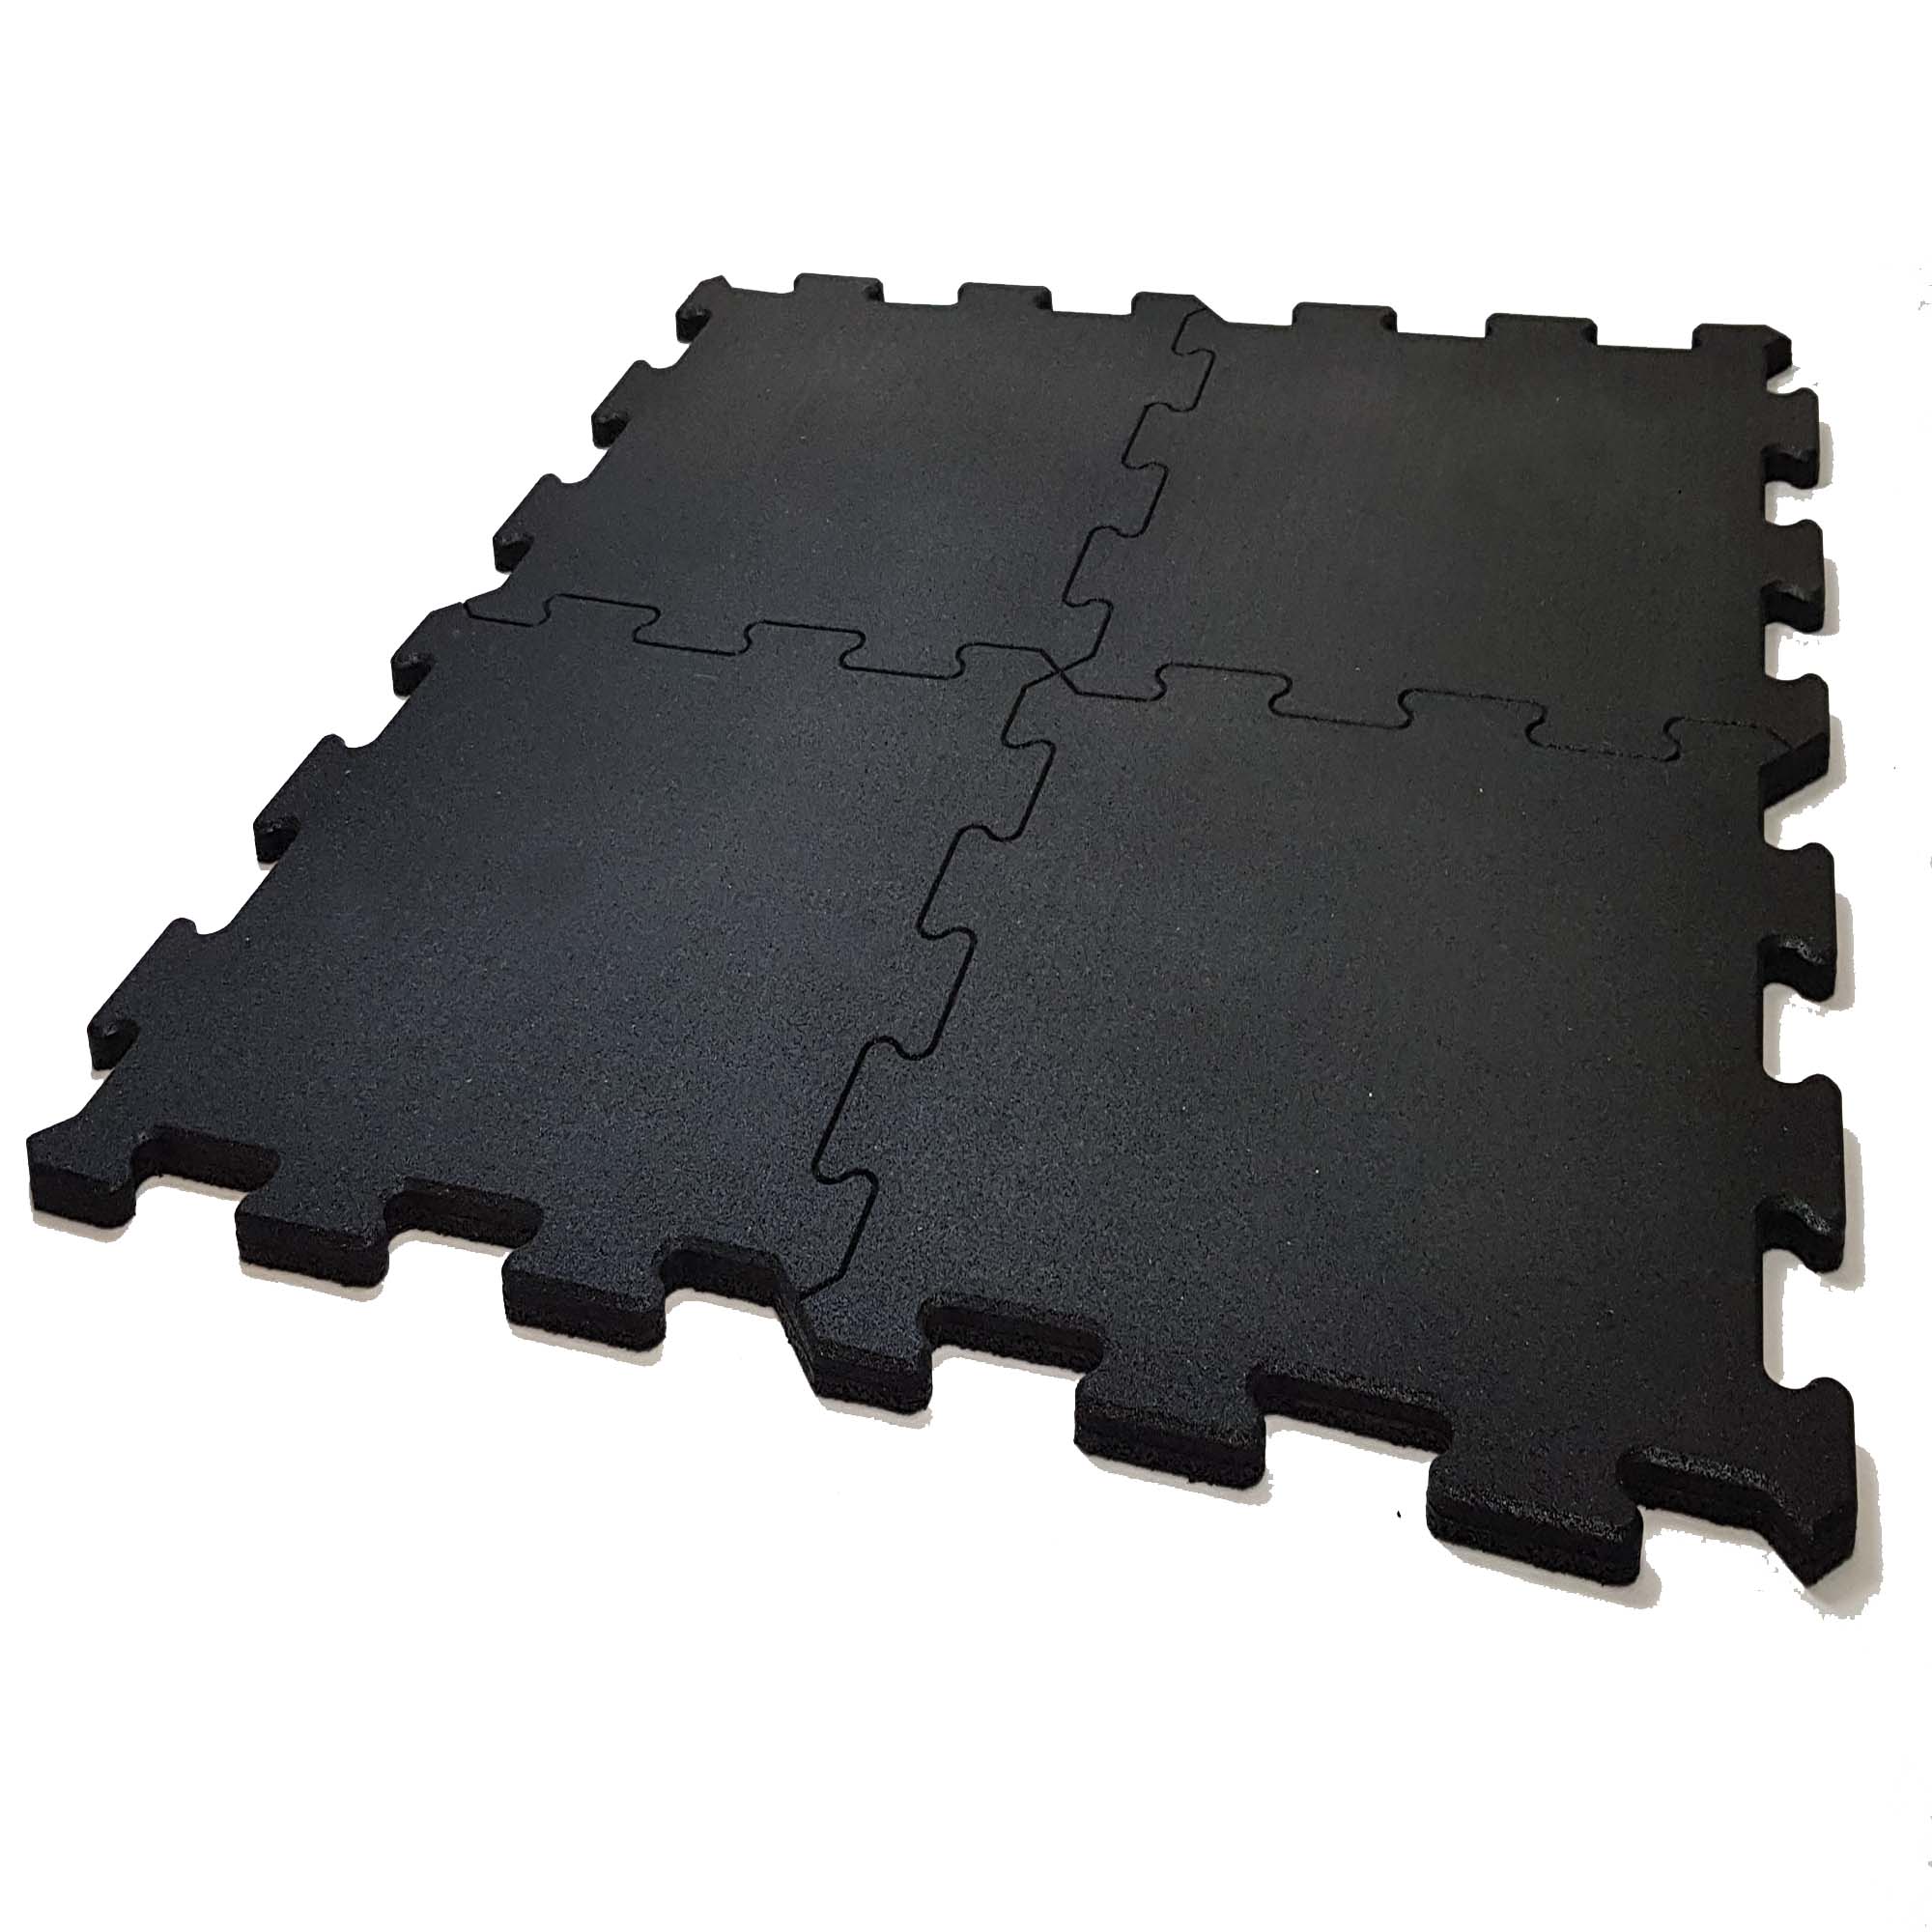 RUBBER MATS AND TILES FOR GYMS